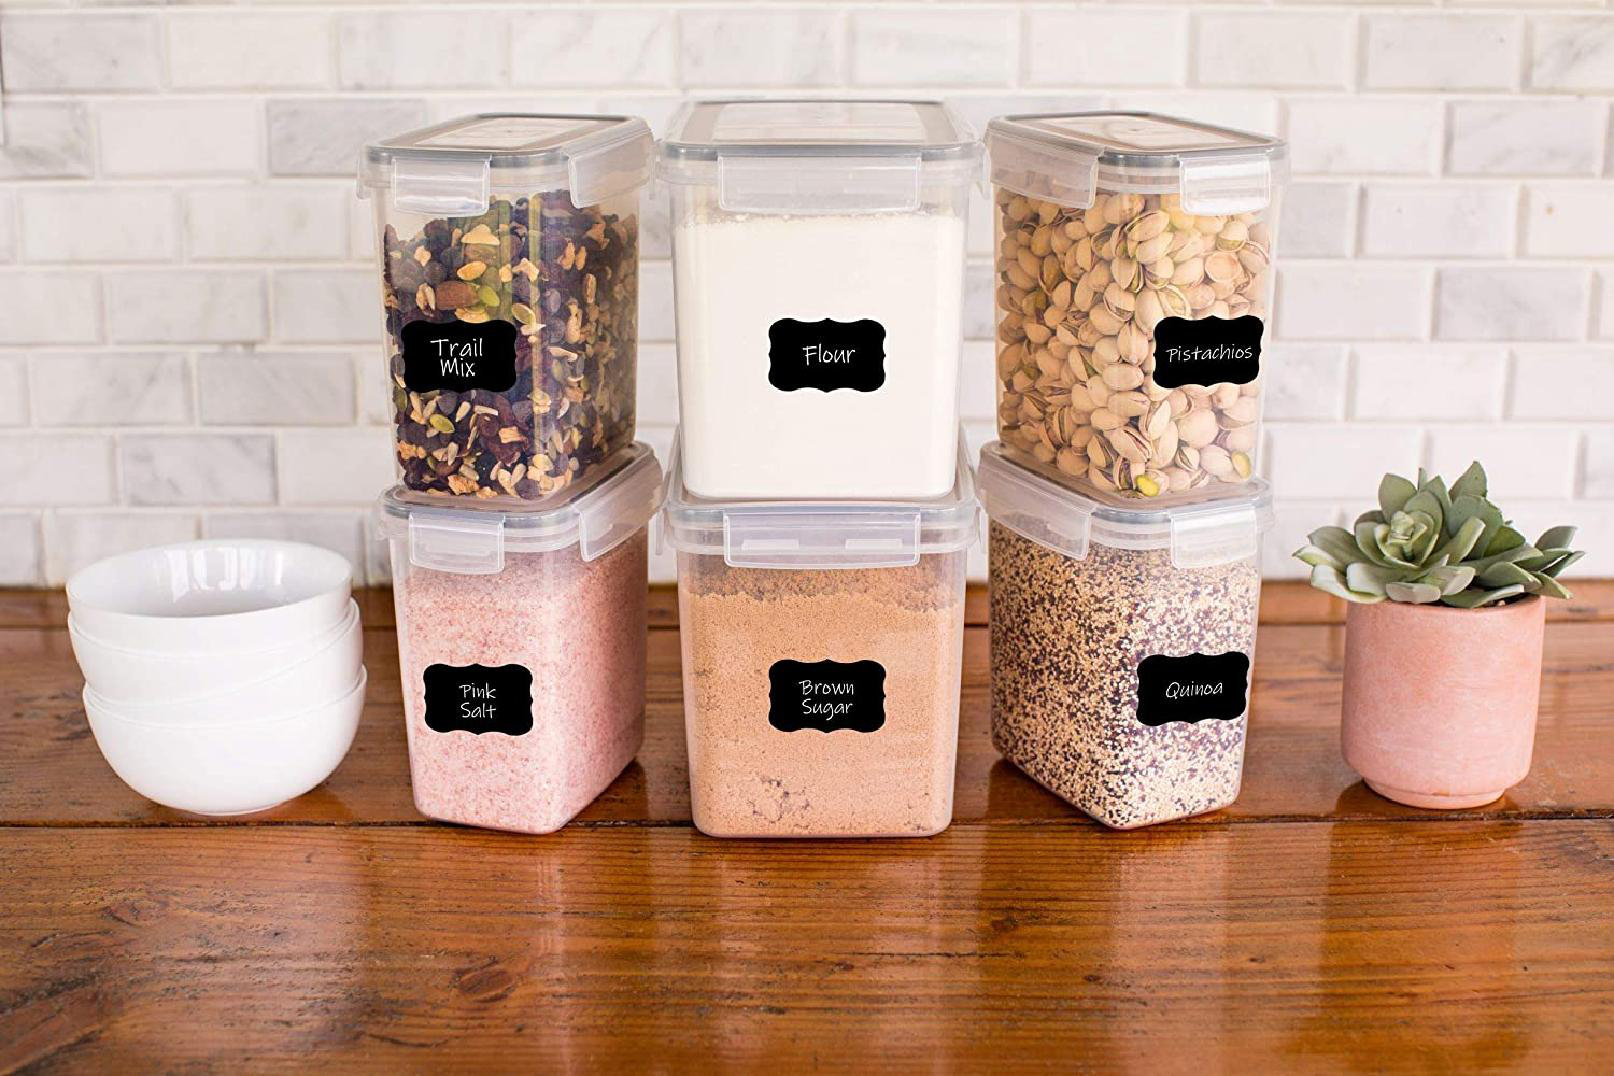 Cheer Collection 3 Piece Set of Airtight Food Storage Containers